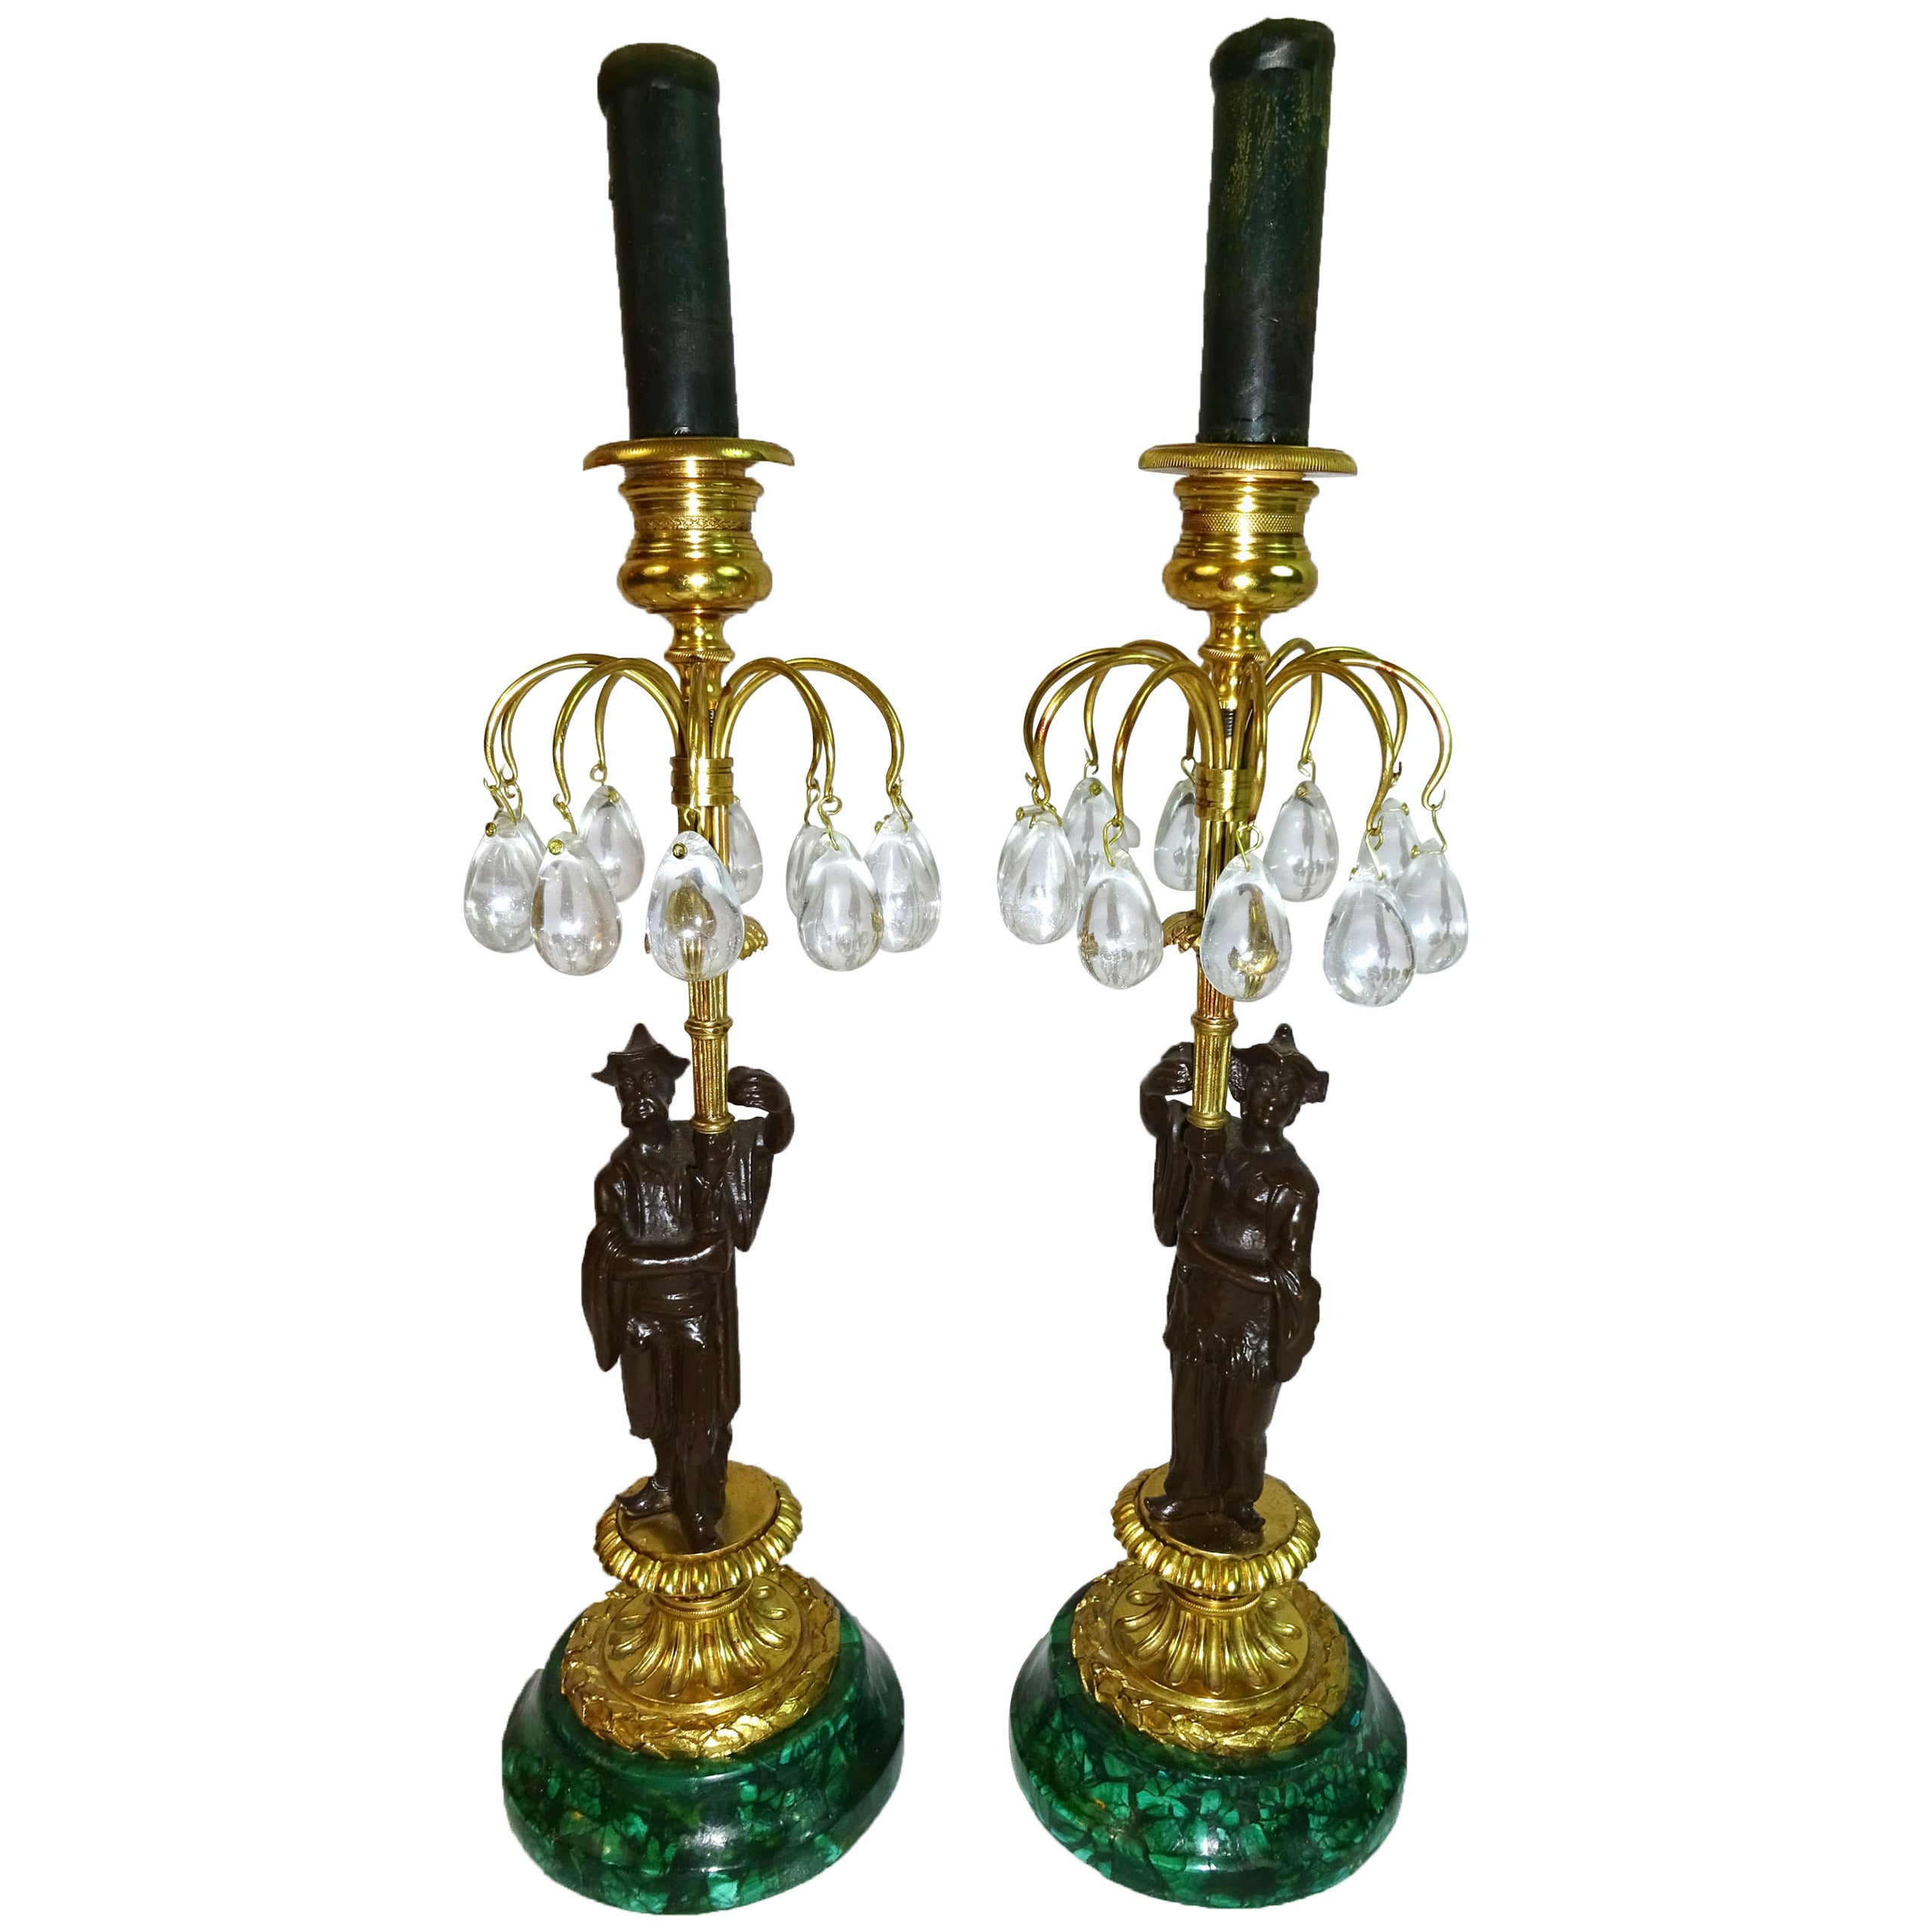 Pair of Late 19th c. French Bronze Ormolu and Malachite Candlesticks